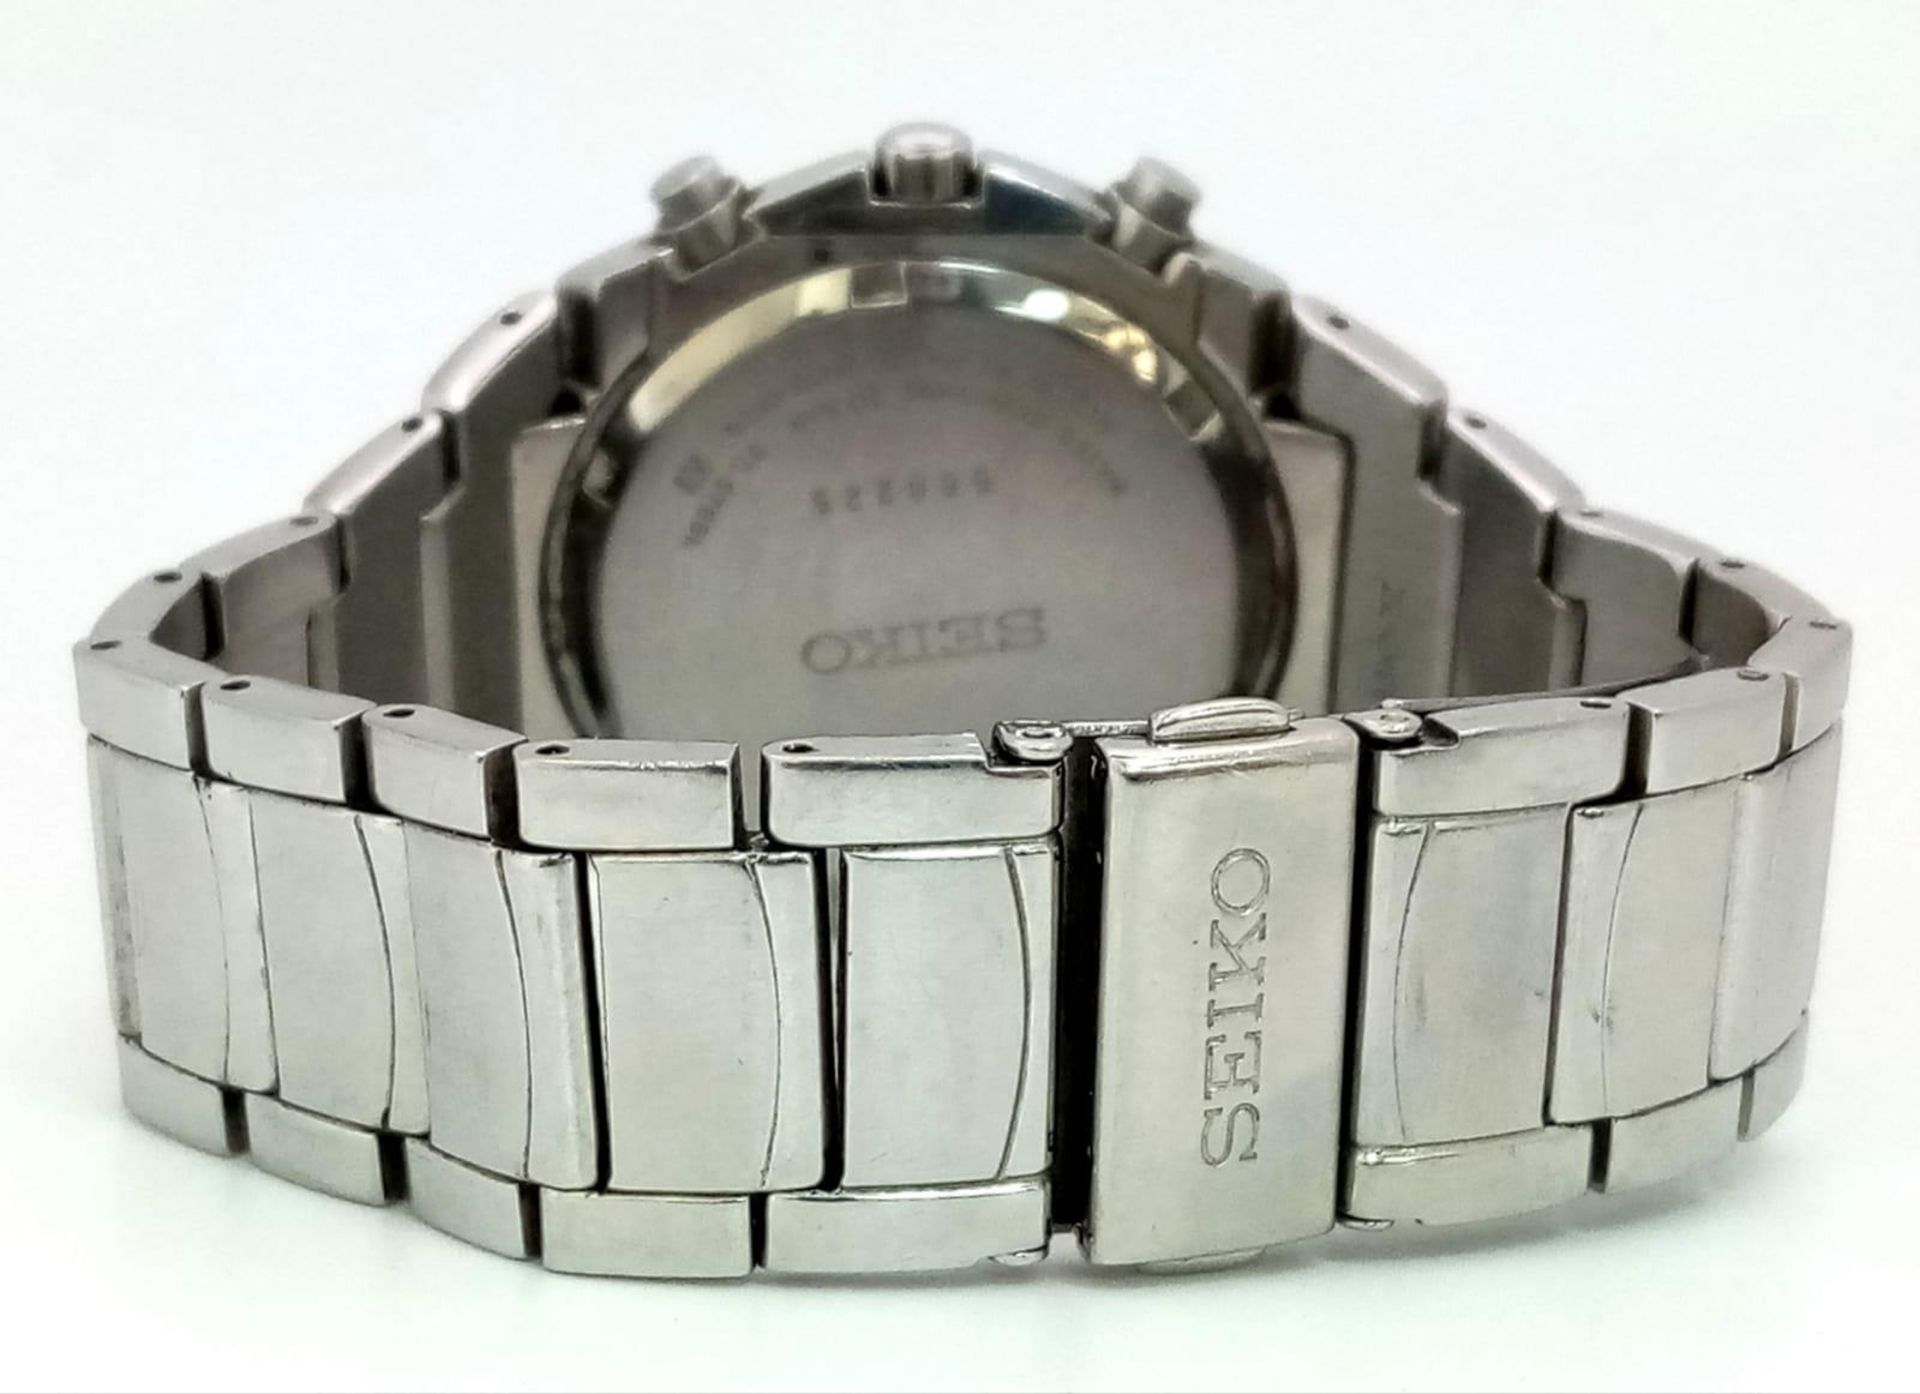 A Seiko Chronograph Quartz Gens Watch. Stainless steel strap and case - 40mm. Silver tone dial - Image 9 of 13